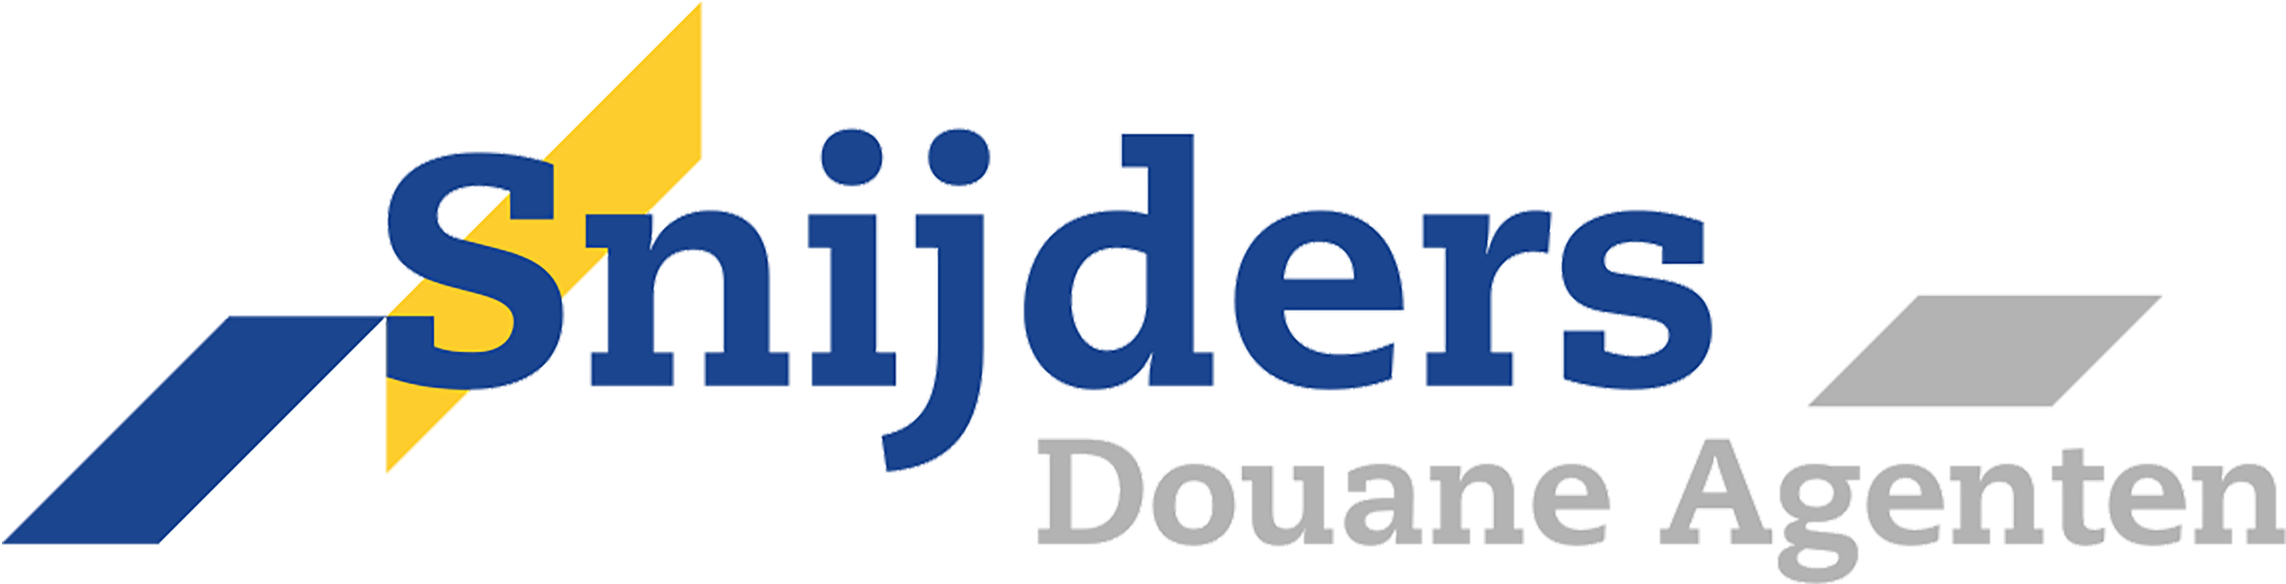 All you need to know about Snijders Douane Agenten